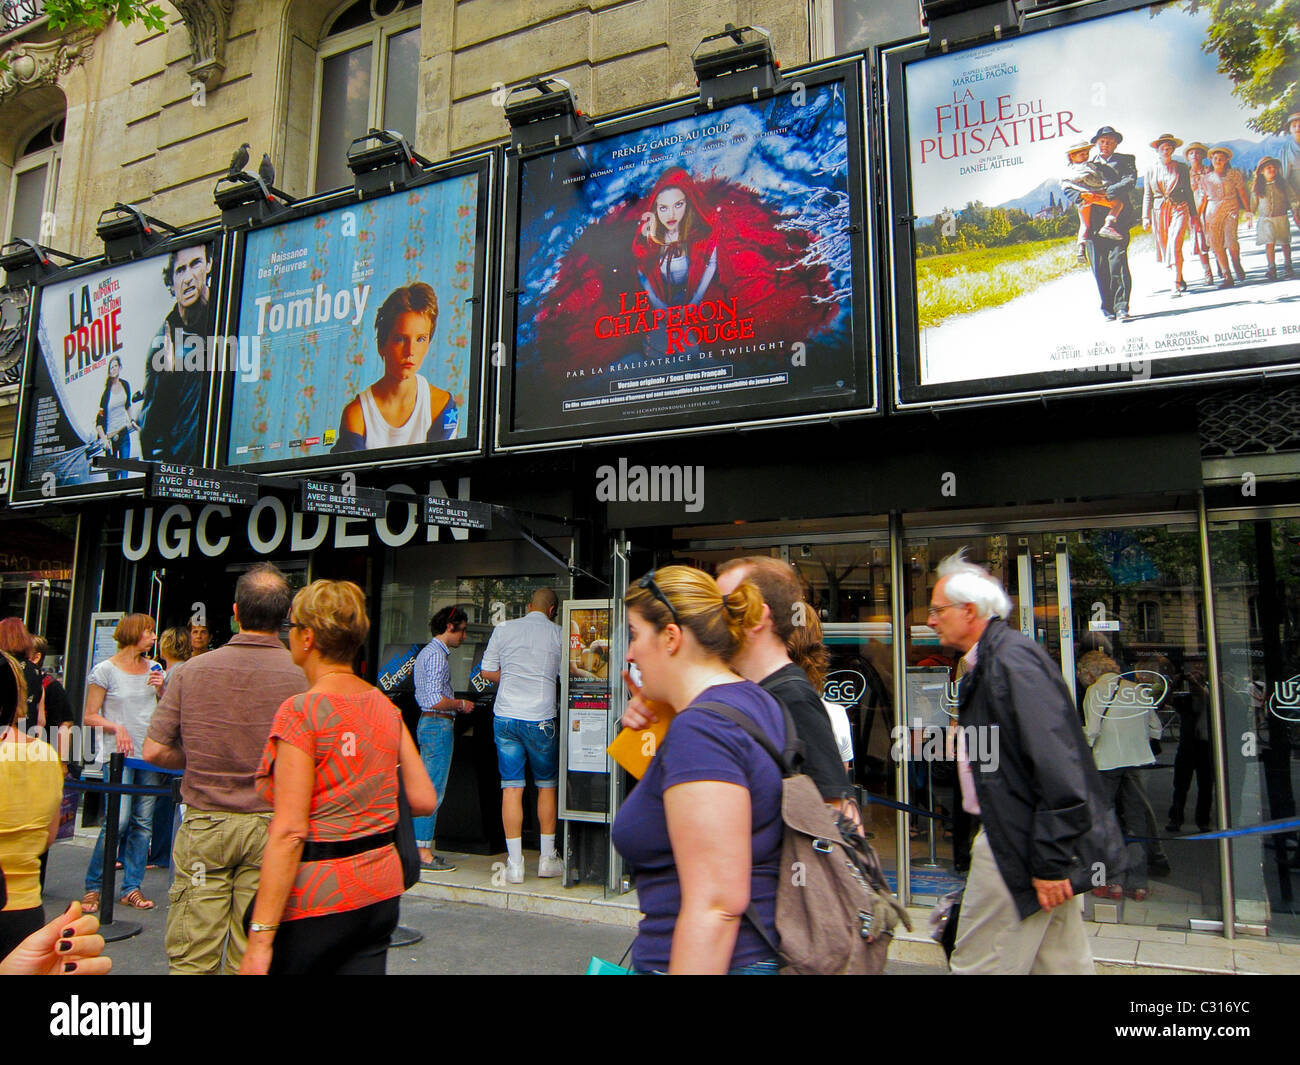 Paris, France, People Walking in Front of French Cinema Theatre Marquee, in Saint Germain des pres District, UGC Odeon cinema posters, paris busy street Paris in the daytime Stock Photo